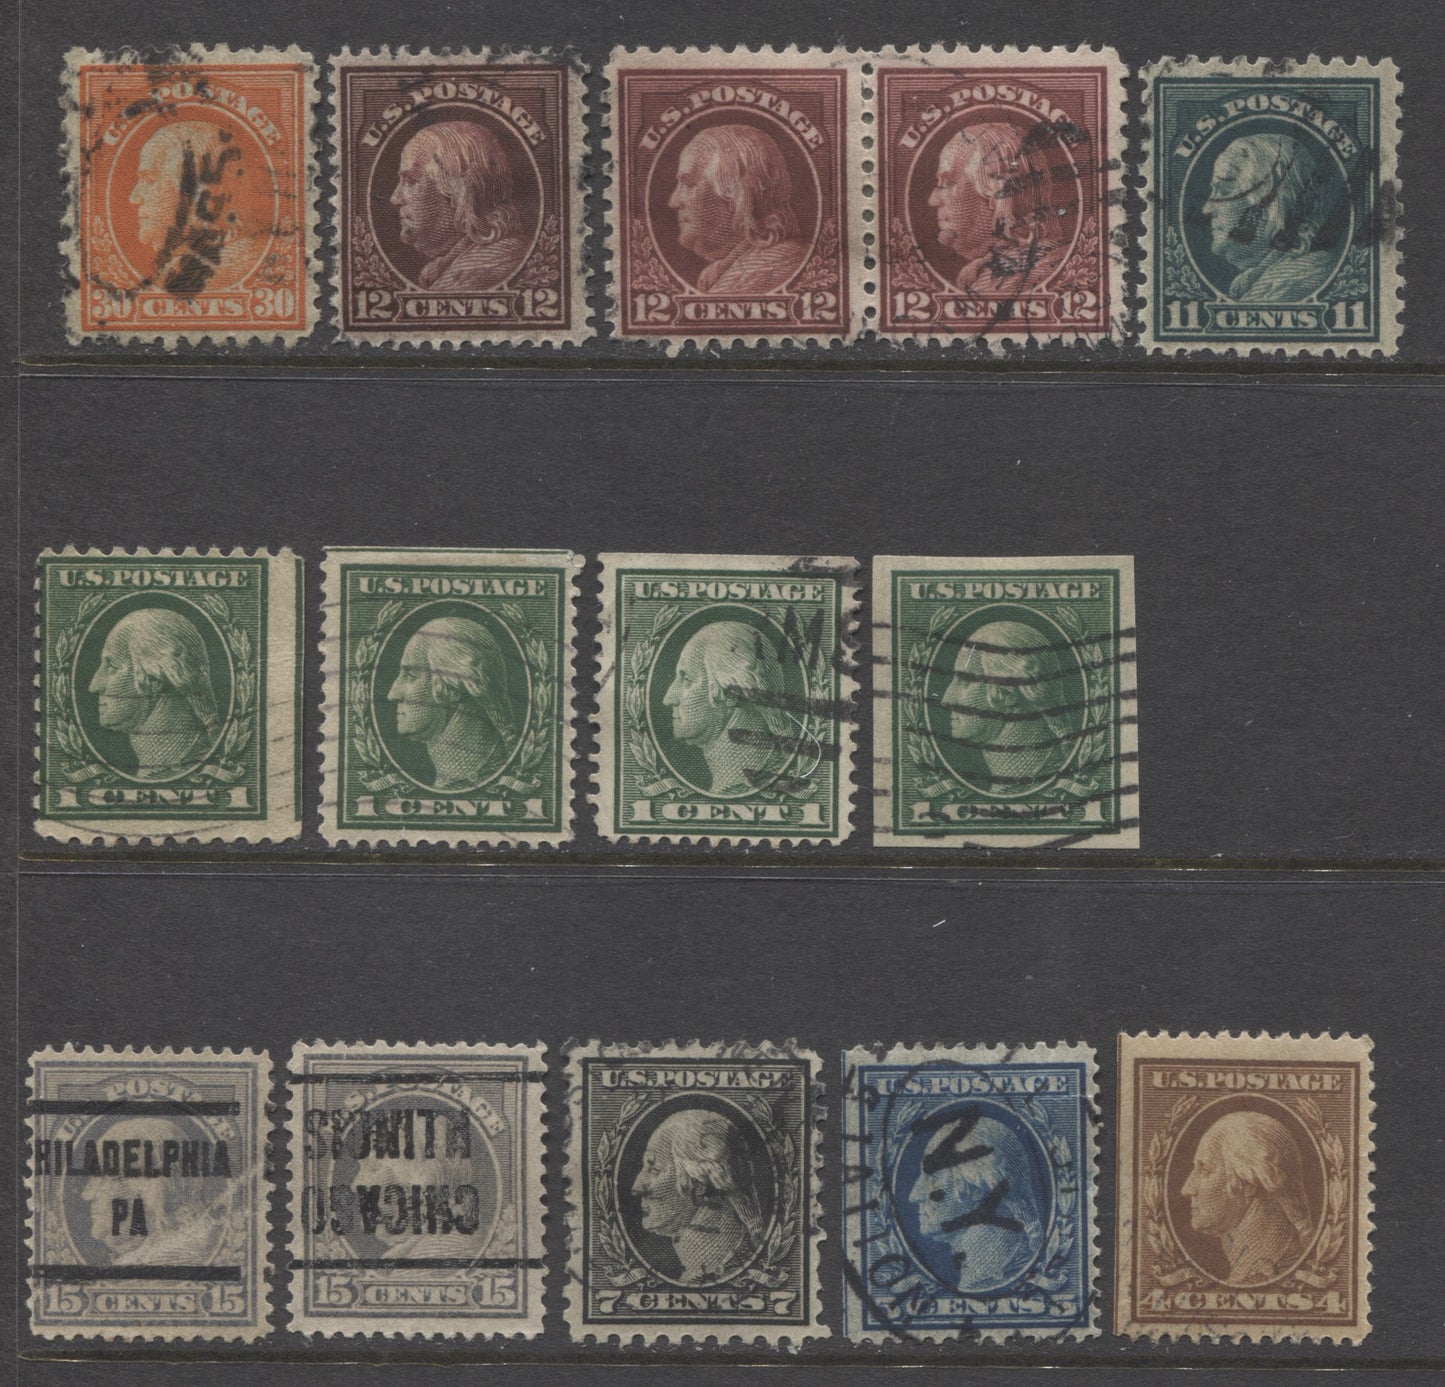 Lot 99 United States SC#377-378, 405, 408, 418, 424, 430, 434-435, 439, 1910-1915 Washington-Franklin Issue, 14 Fine Used Examples, Watermarked, Multiple Perfs. 2022 Scott Classic Catalogue $60.25 USD, Click on Listing to See ALL Pictures